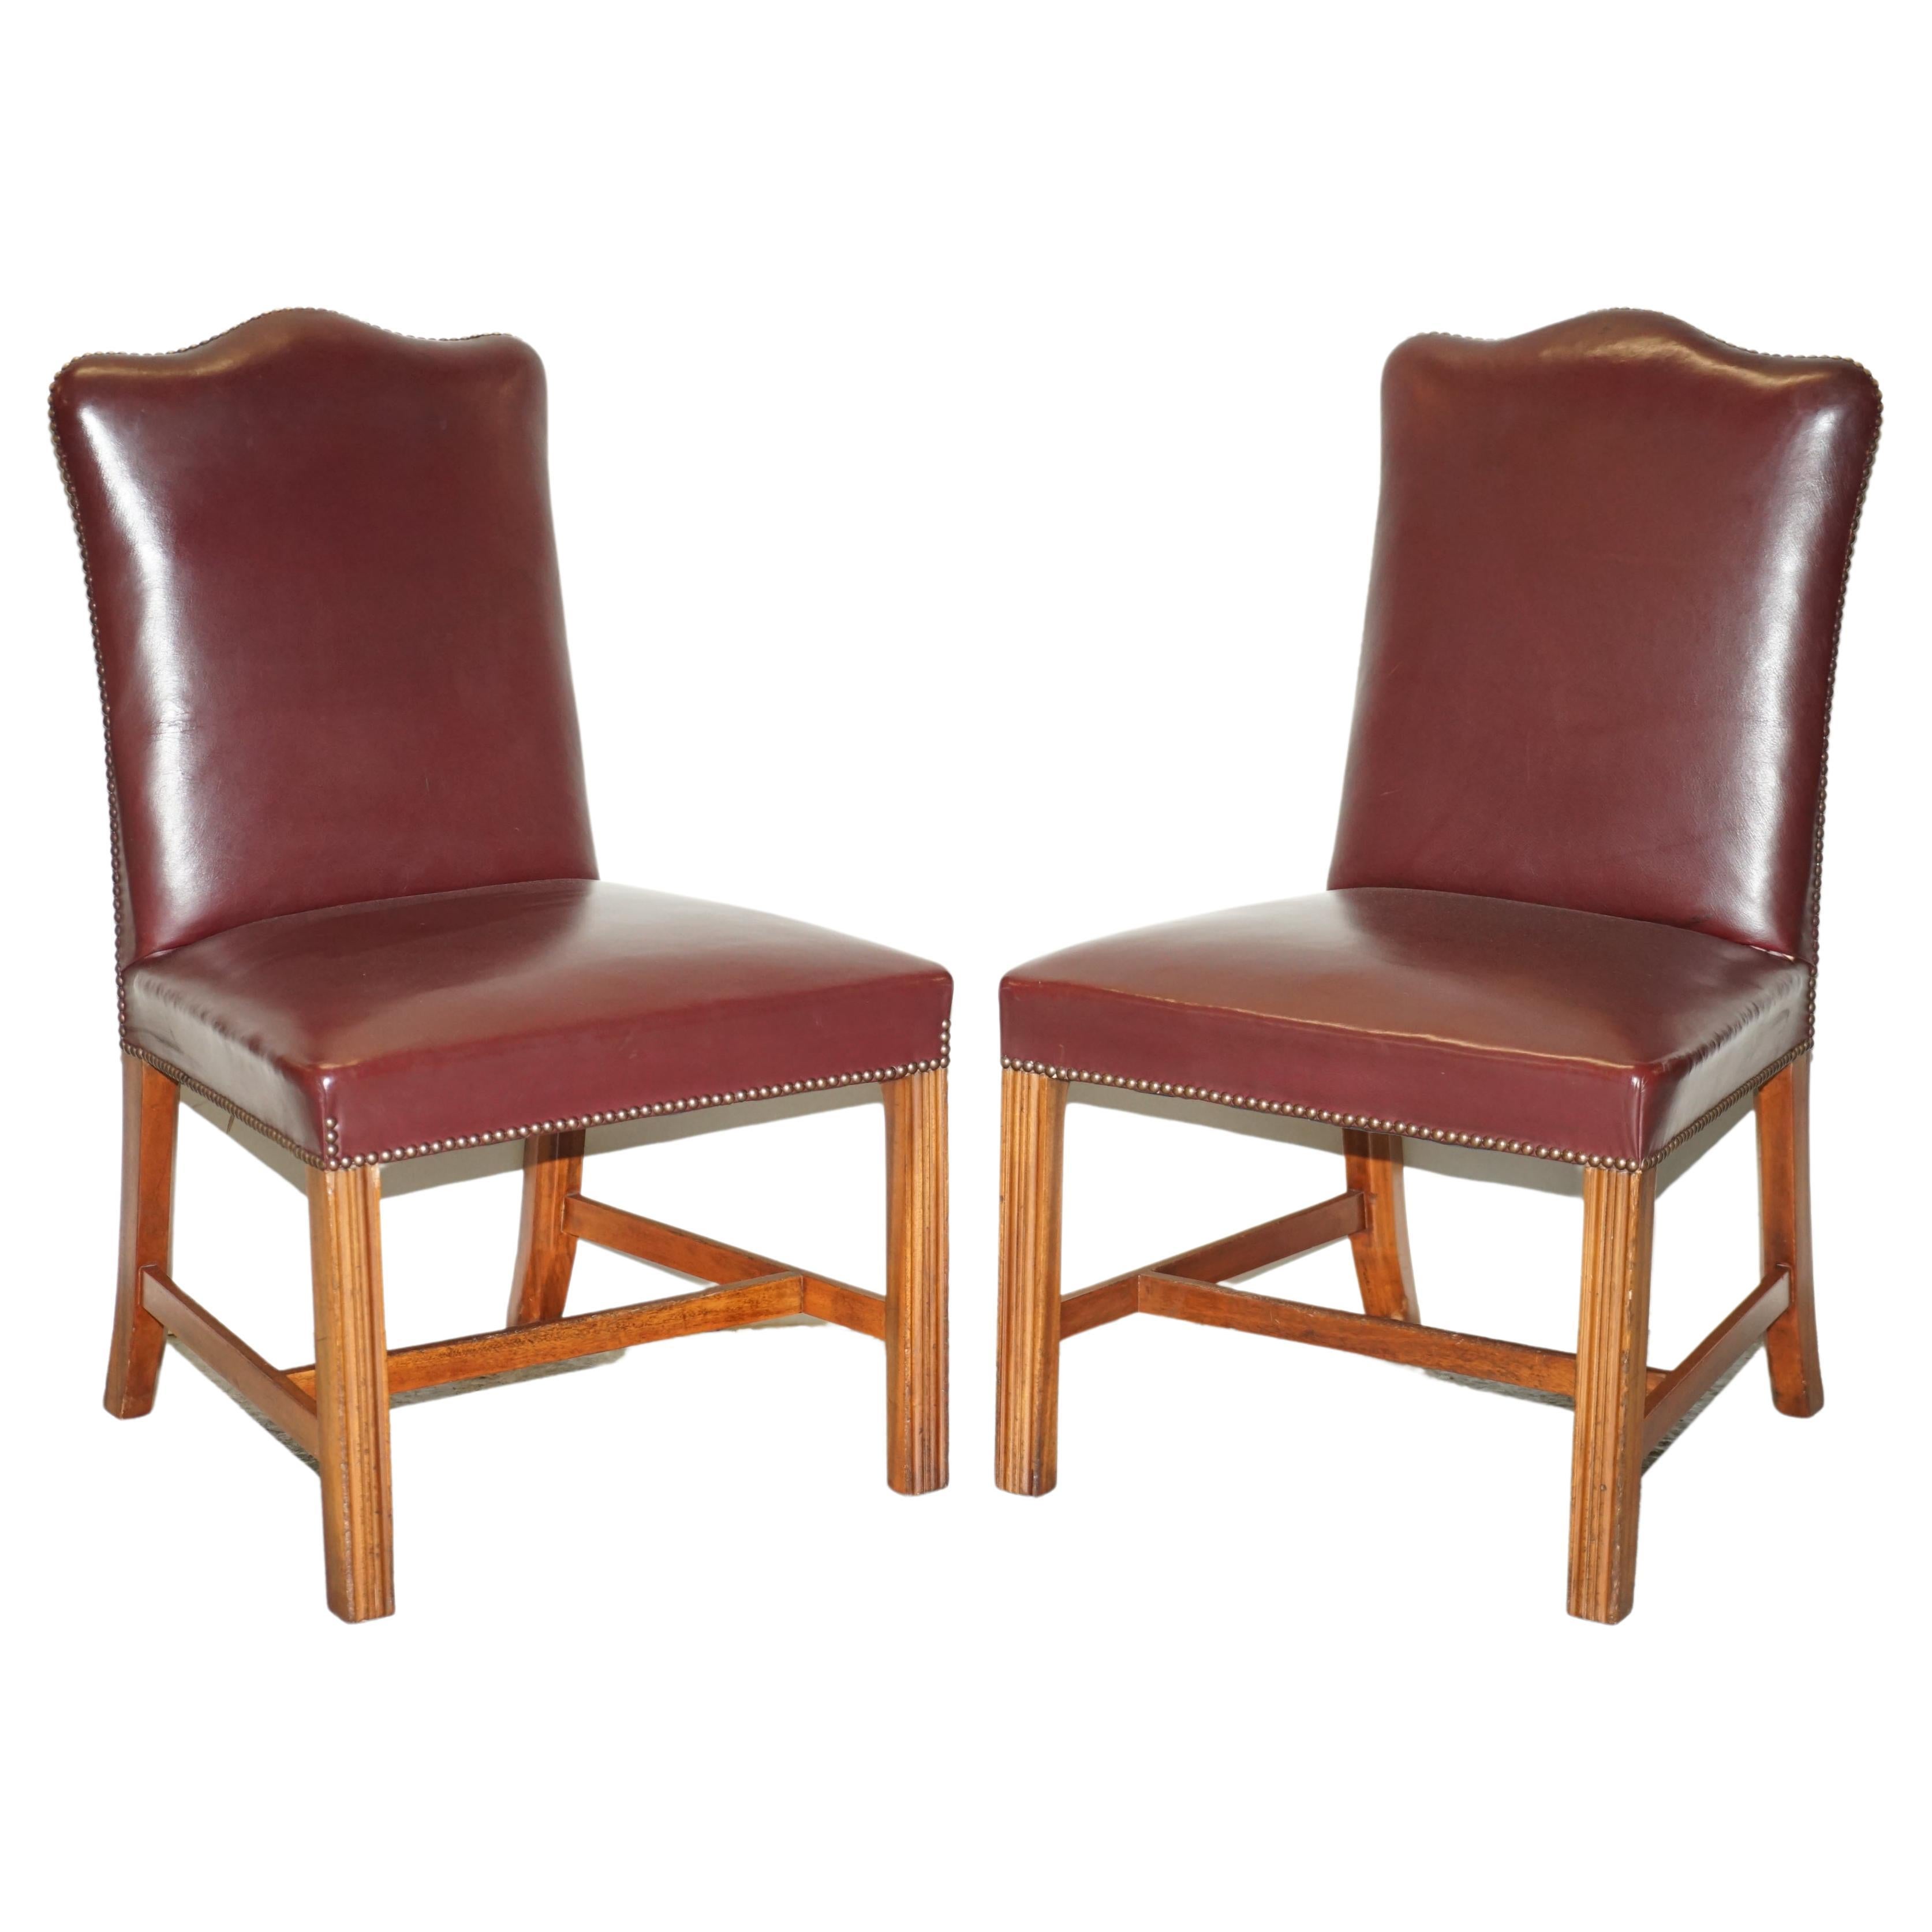 Pair of Leather Office Chairs from Princess Diana's Family Estate Spencer House